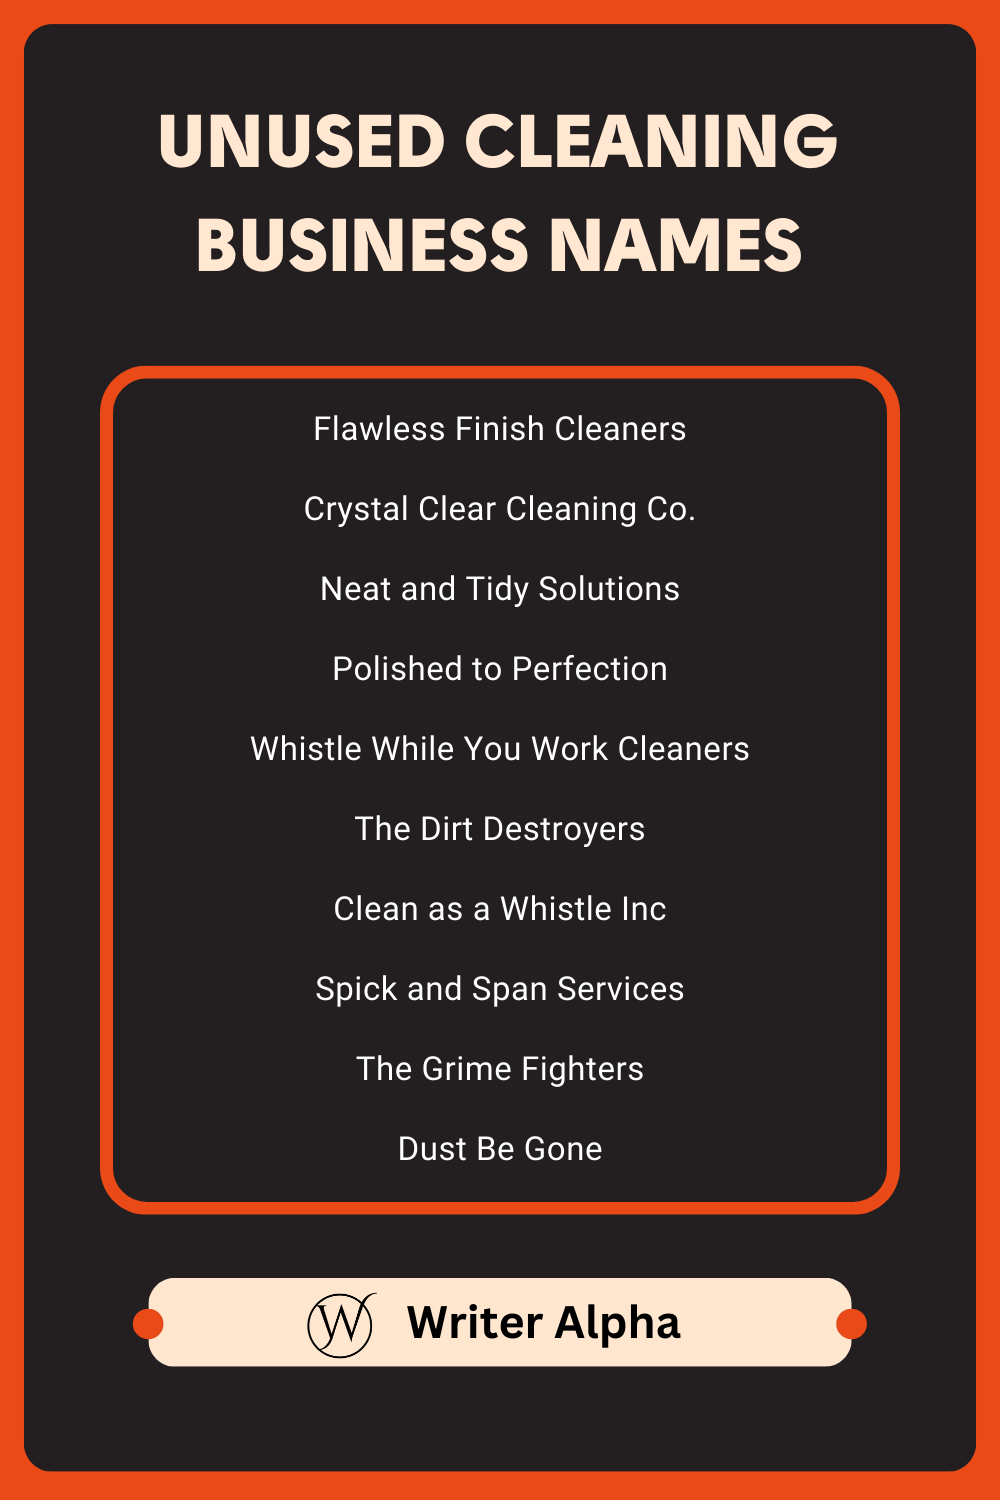 Unused cleaning business names